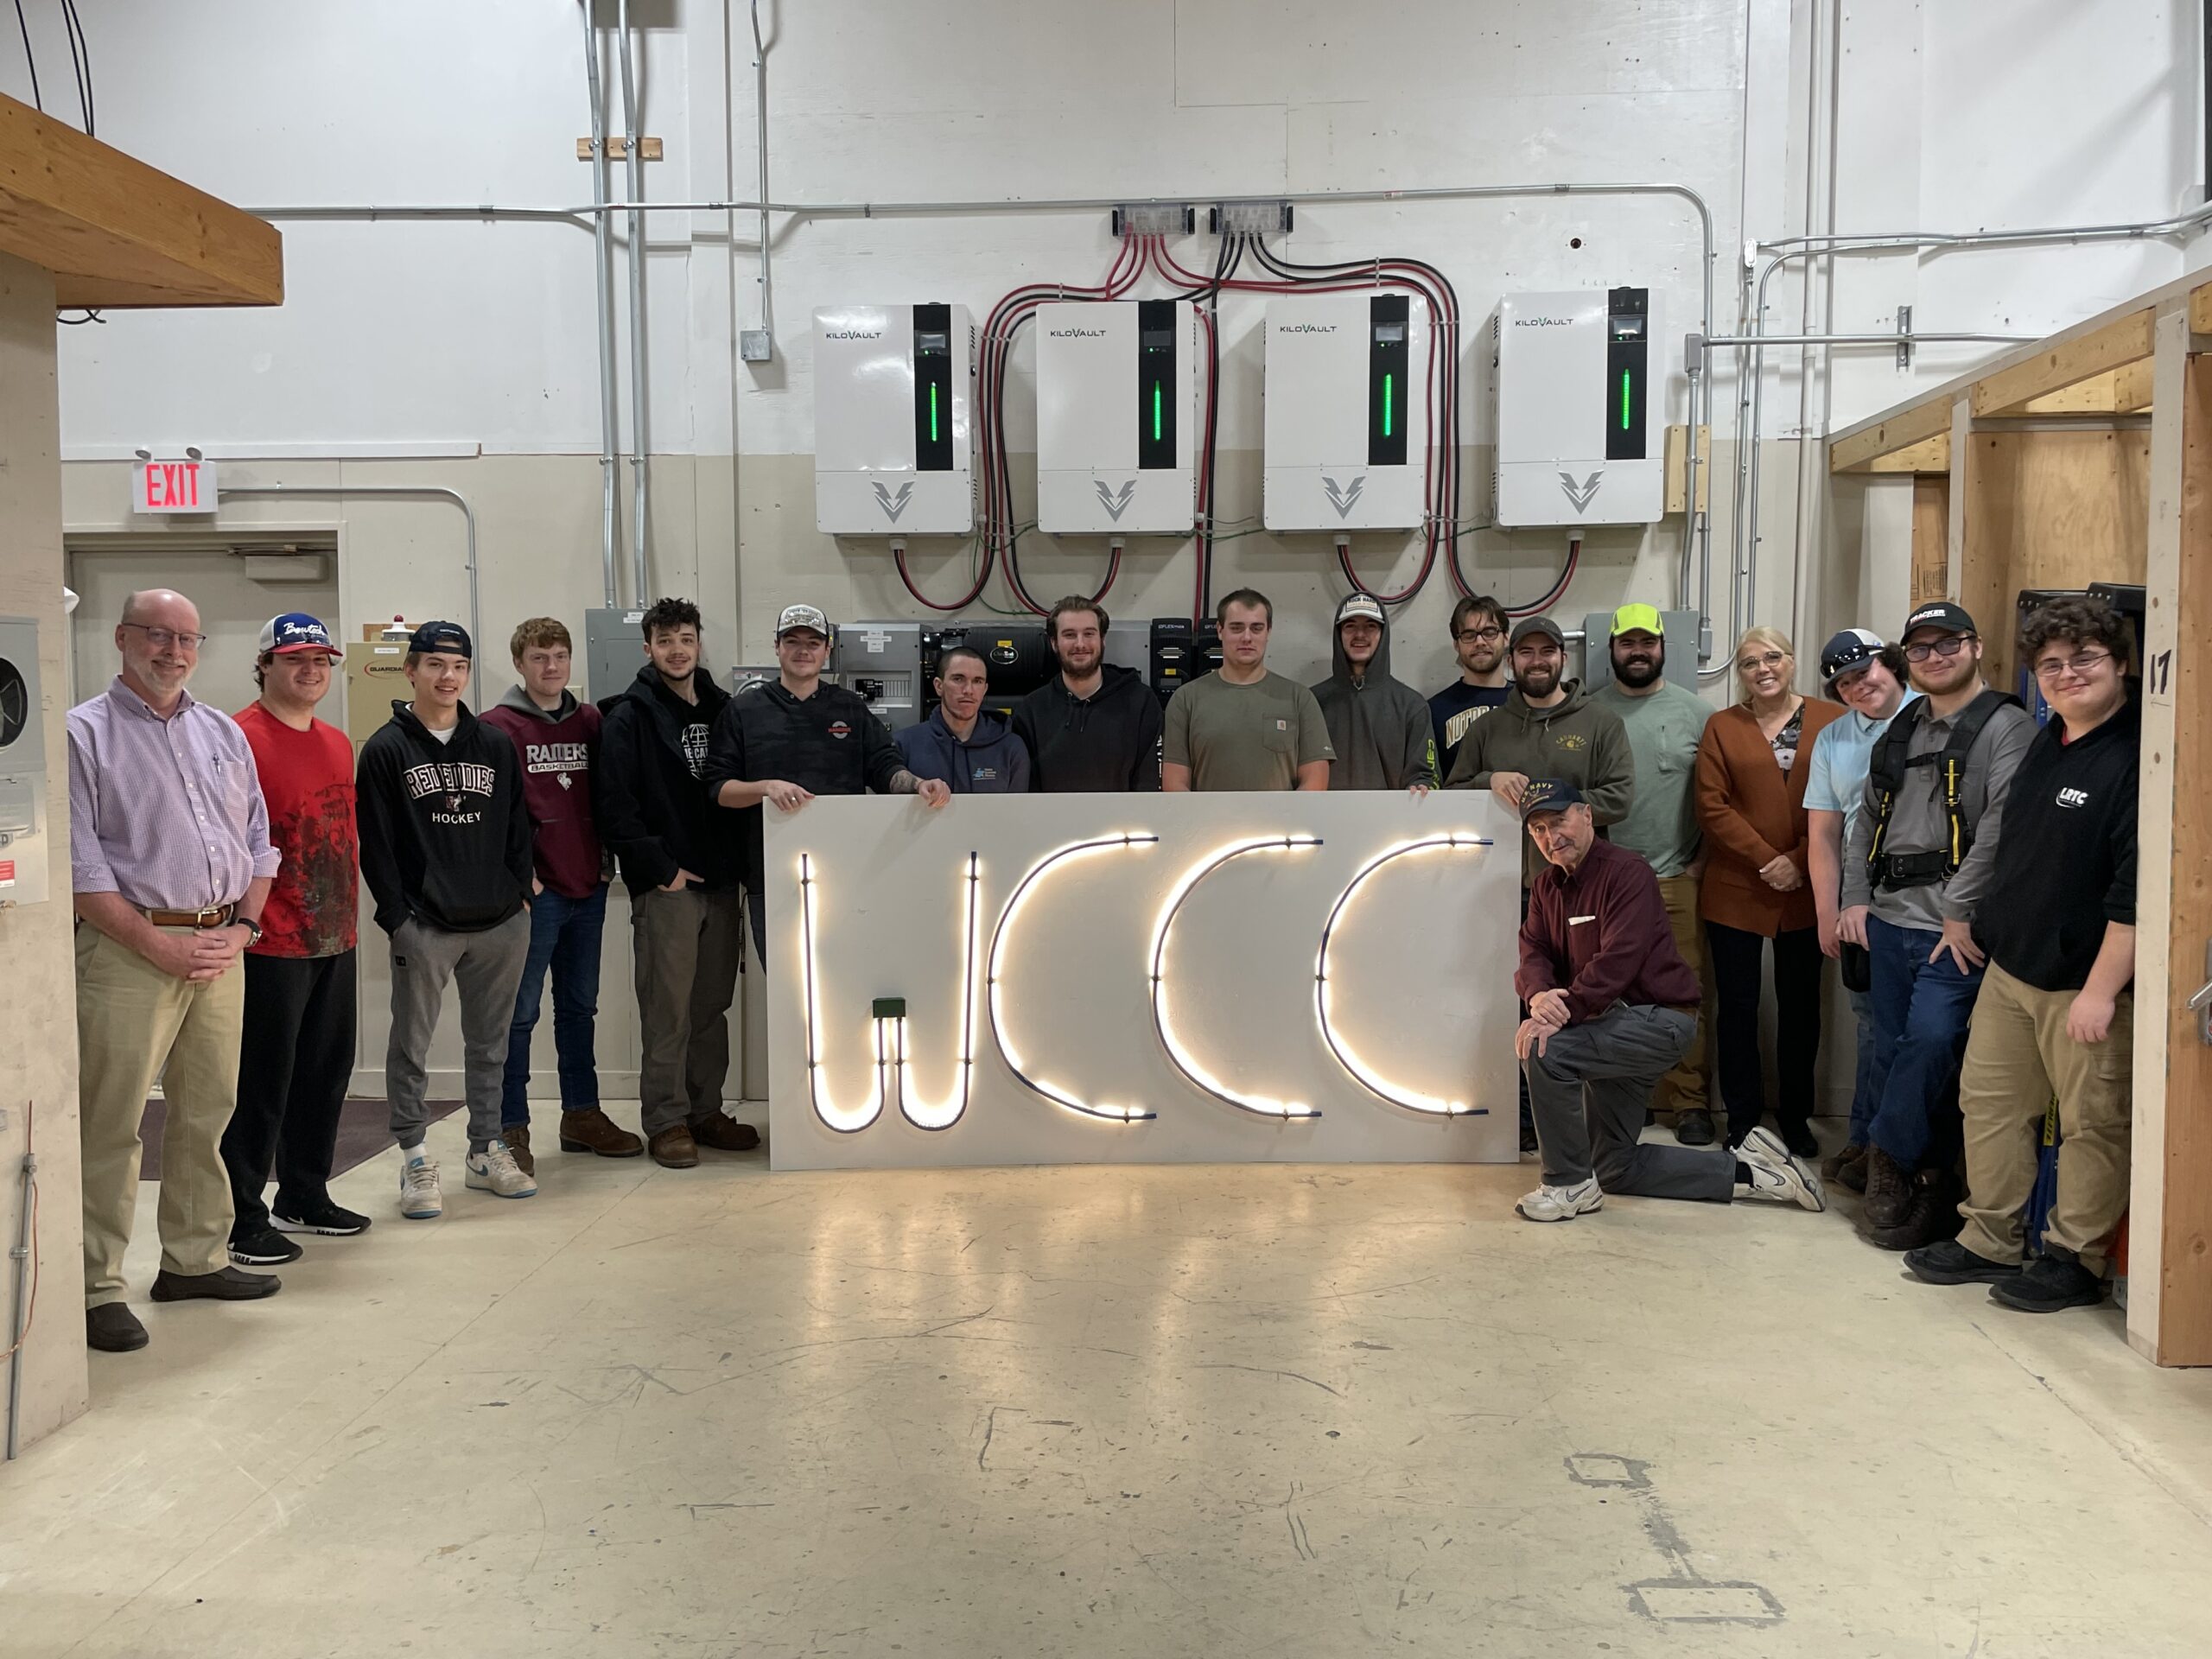 RCE students pose with new LED sign